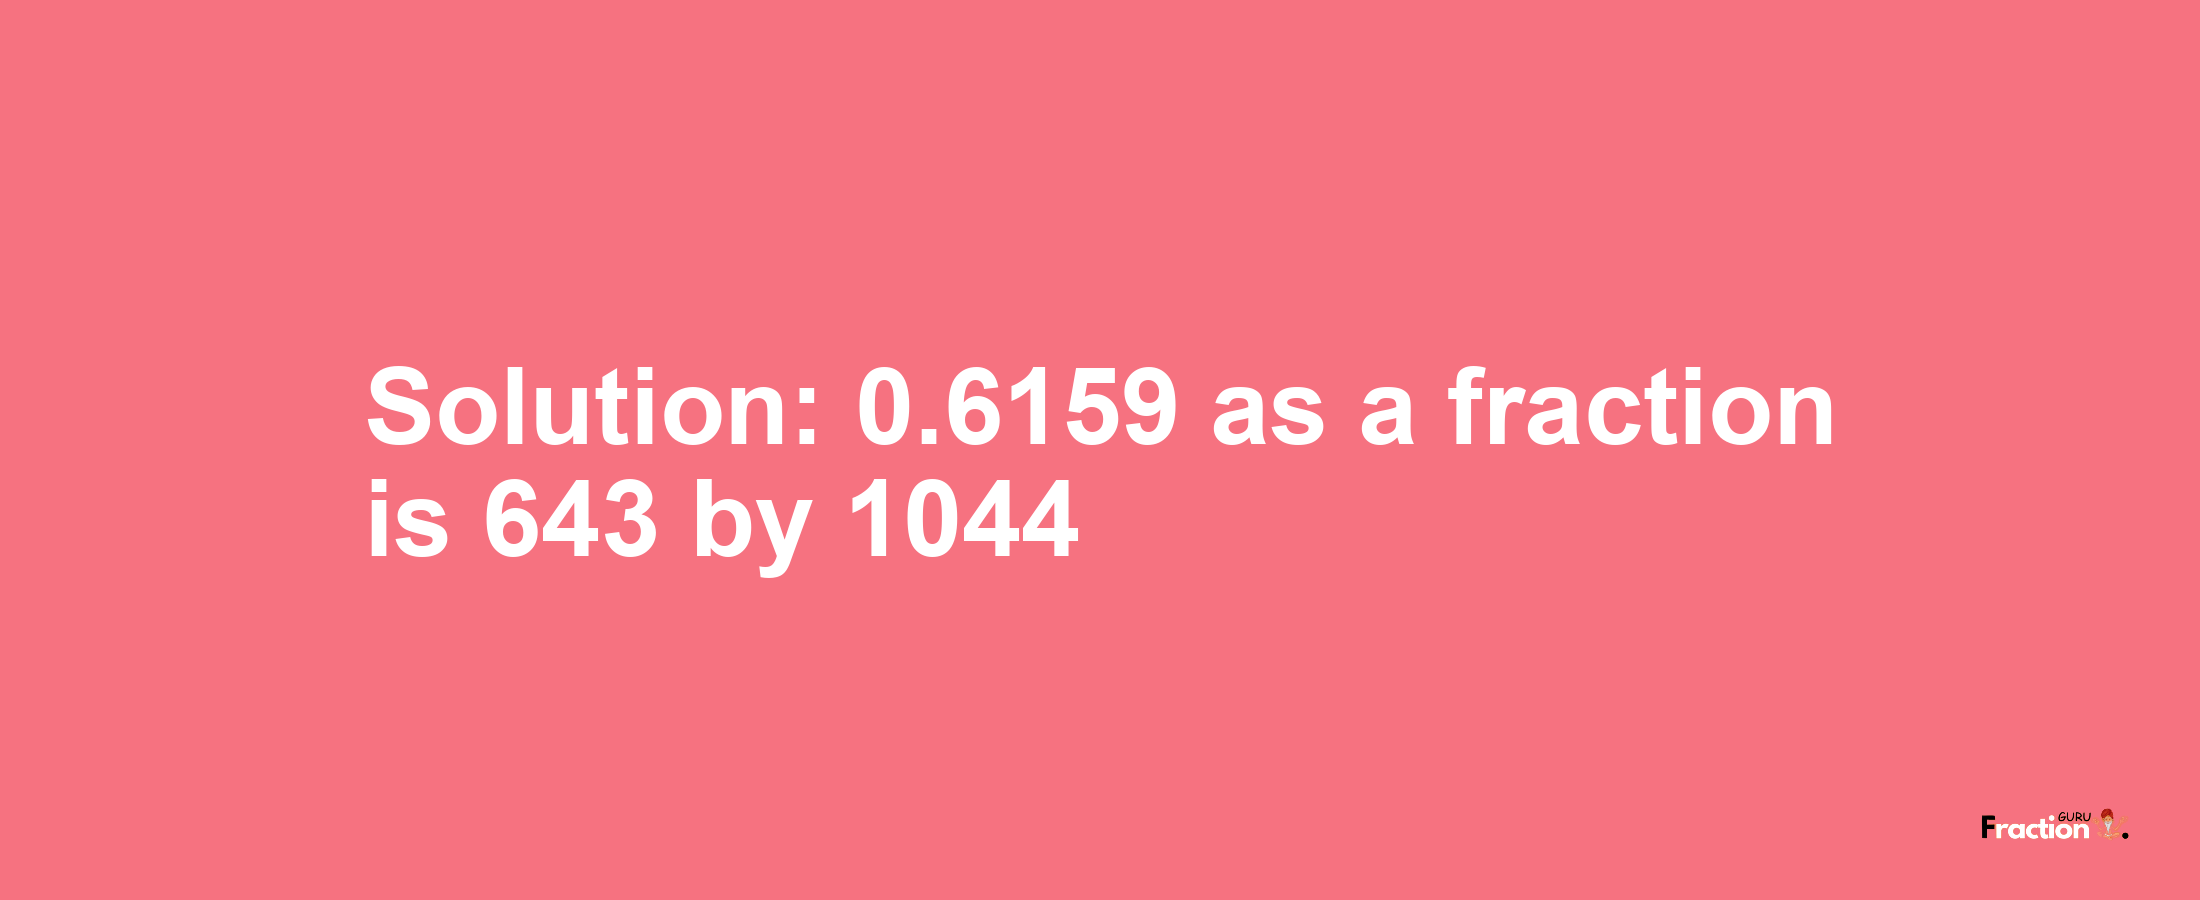 Solution:0.6159 as a fraction is 643/1044